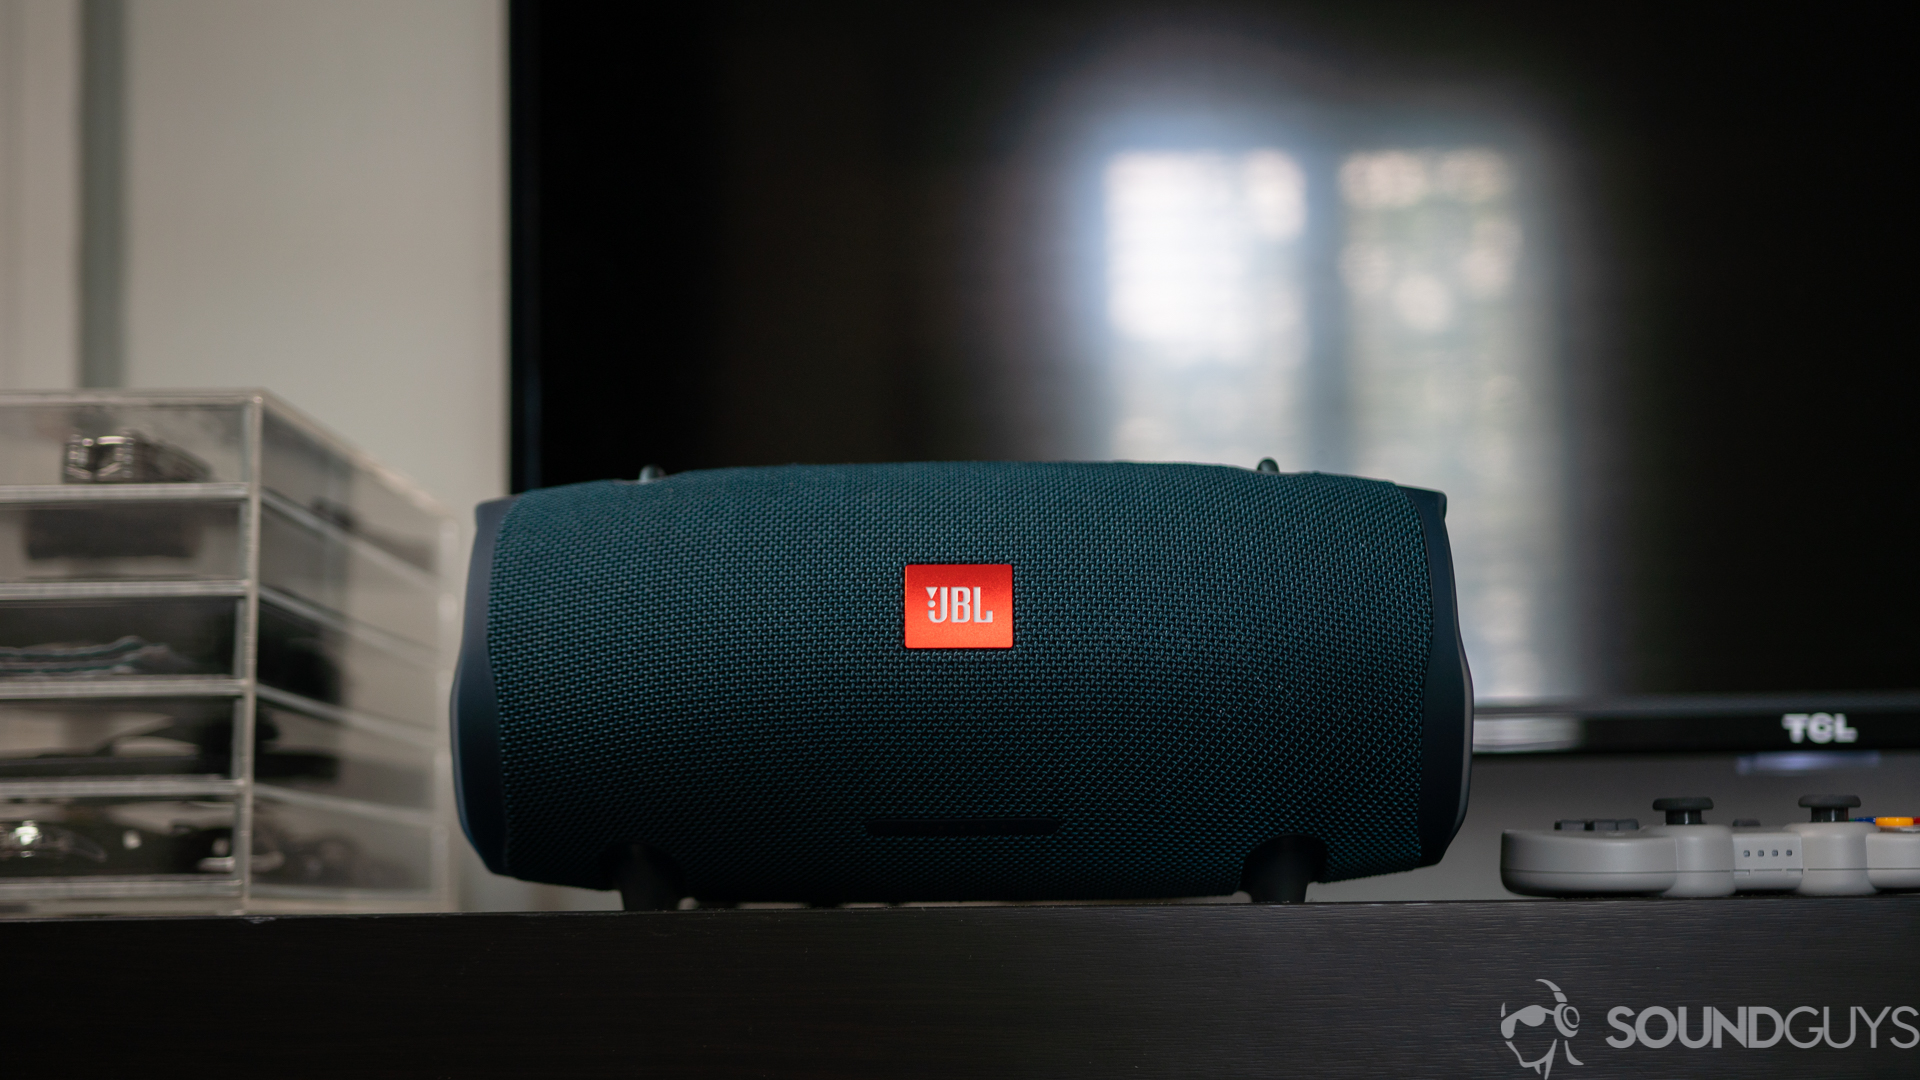 Shot of the JBL Xtreme 2 from the front on top of a black table with a TV in the background.